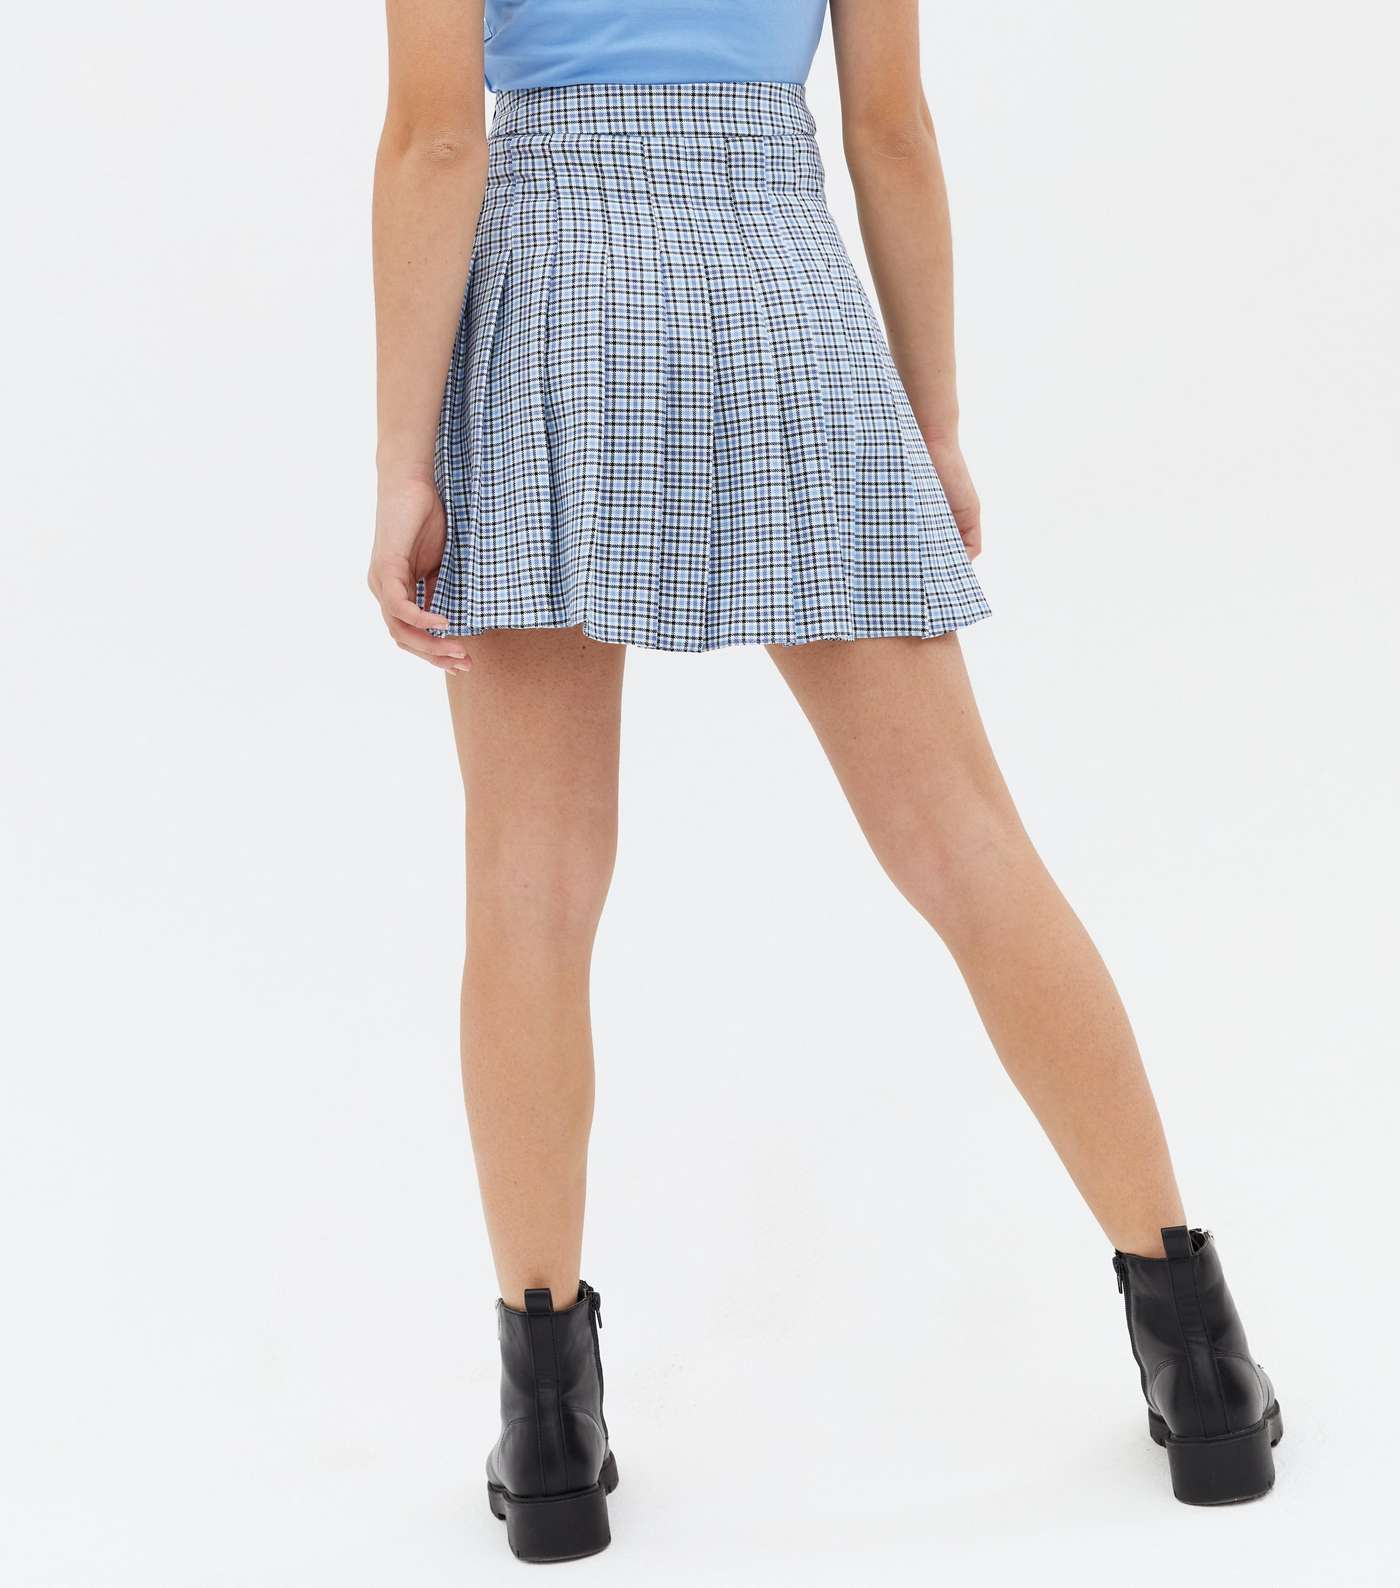 Girls Pale Blue Check Pleated Tennis Skirt Image 4